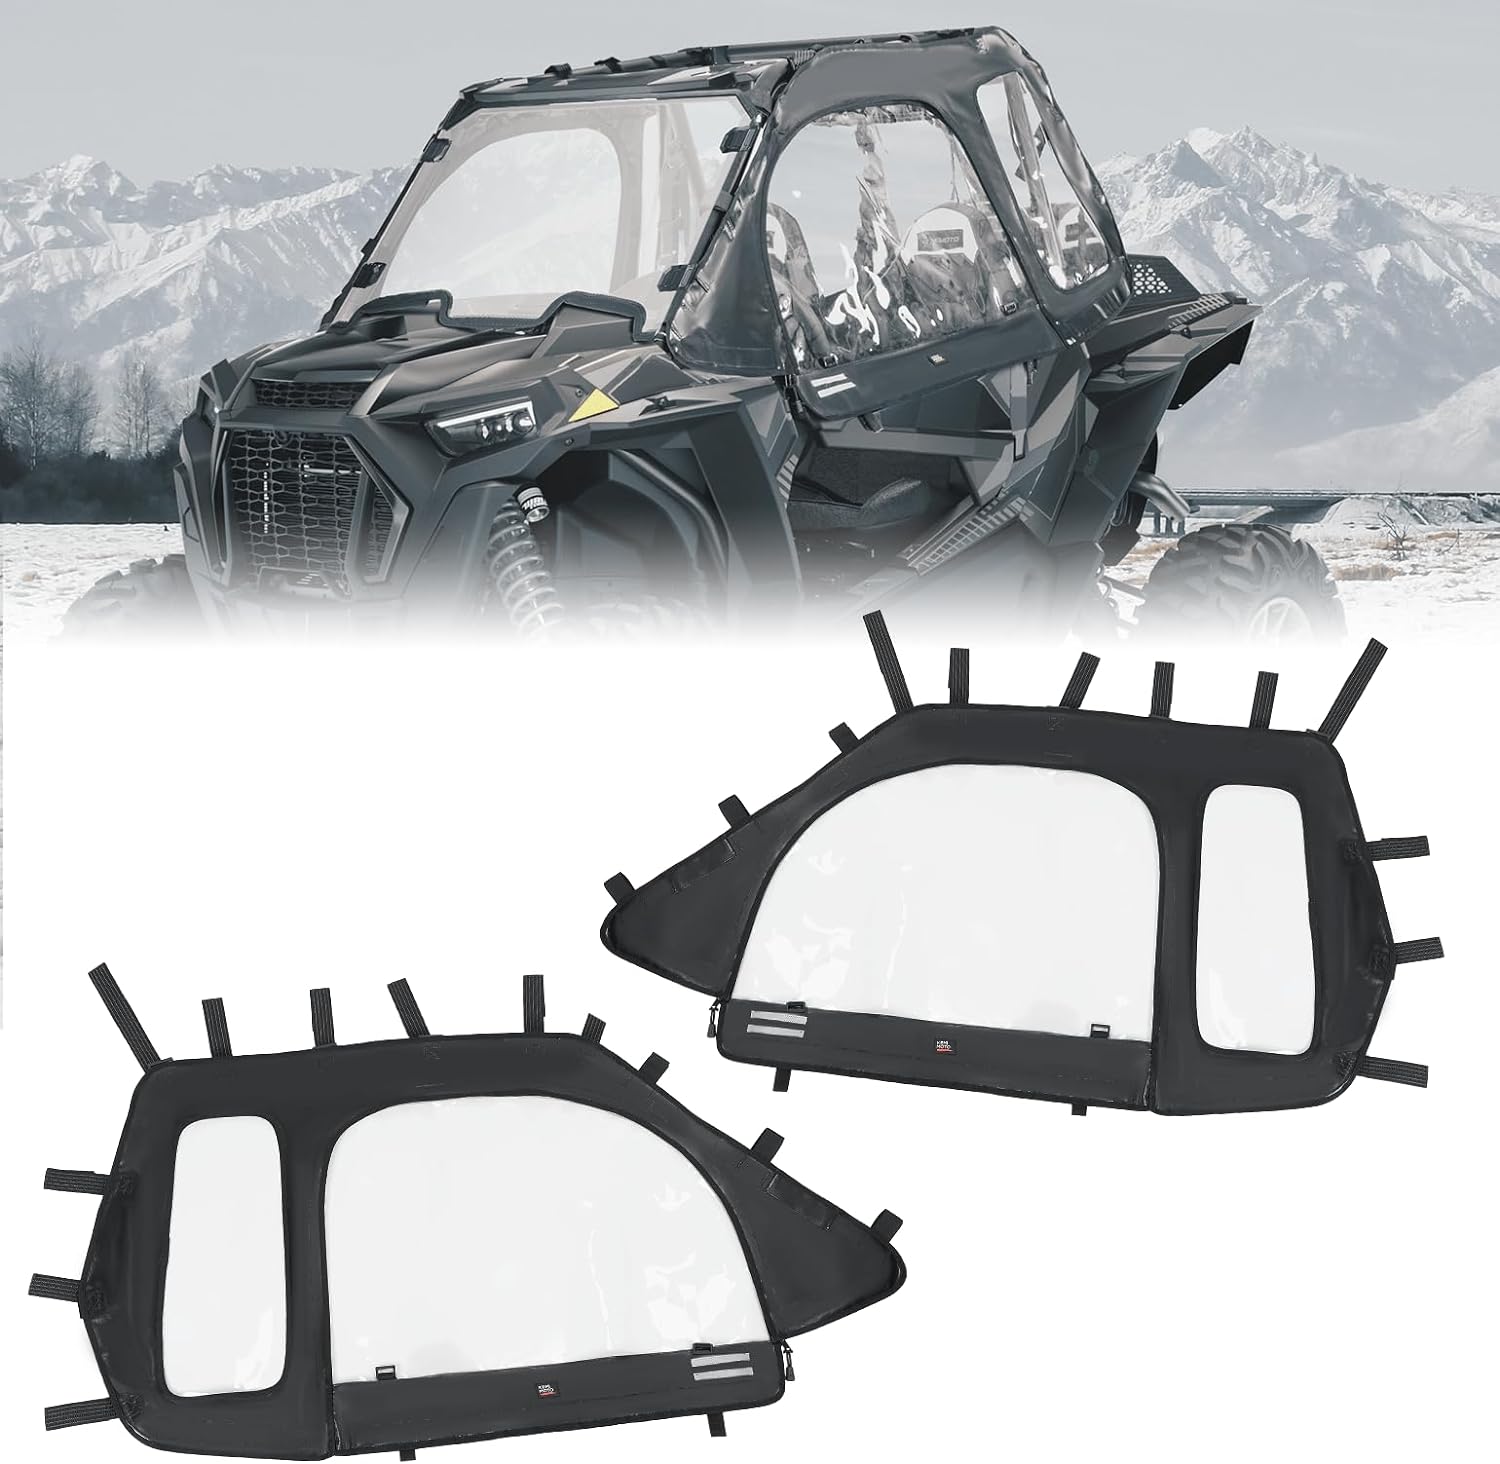 Snag Your Discount! Upgrade Your Polaris RZR with KEMIMOTO Upper Doors - Limited-Time Promo!